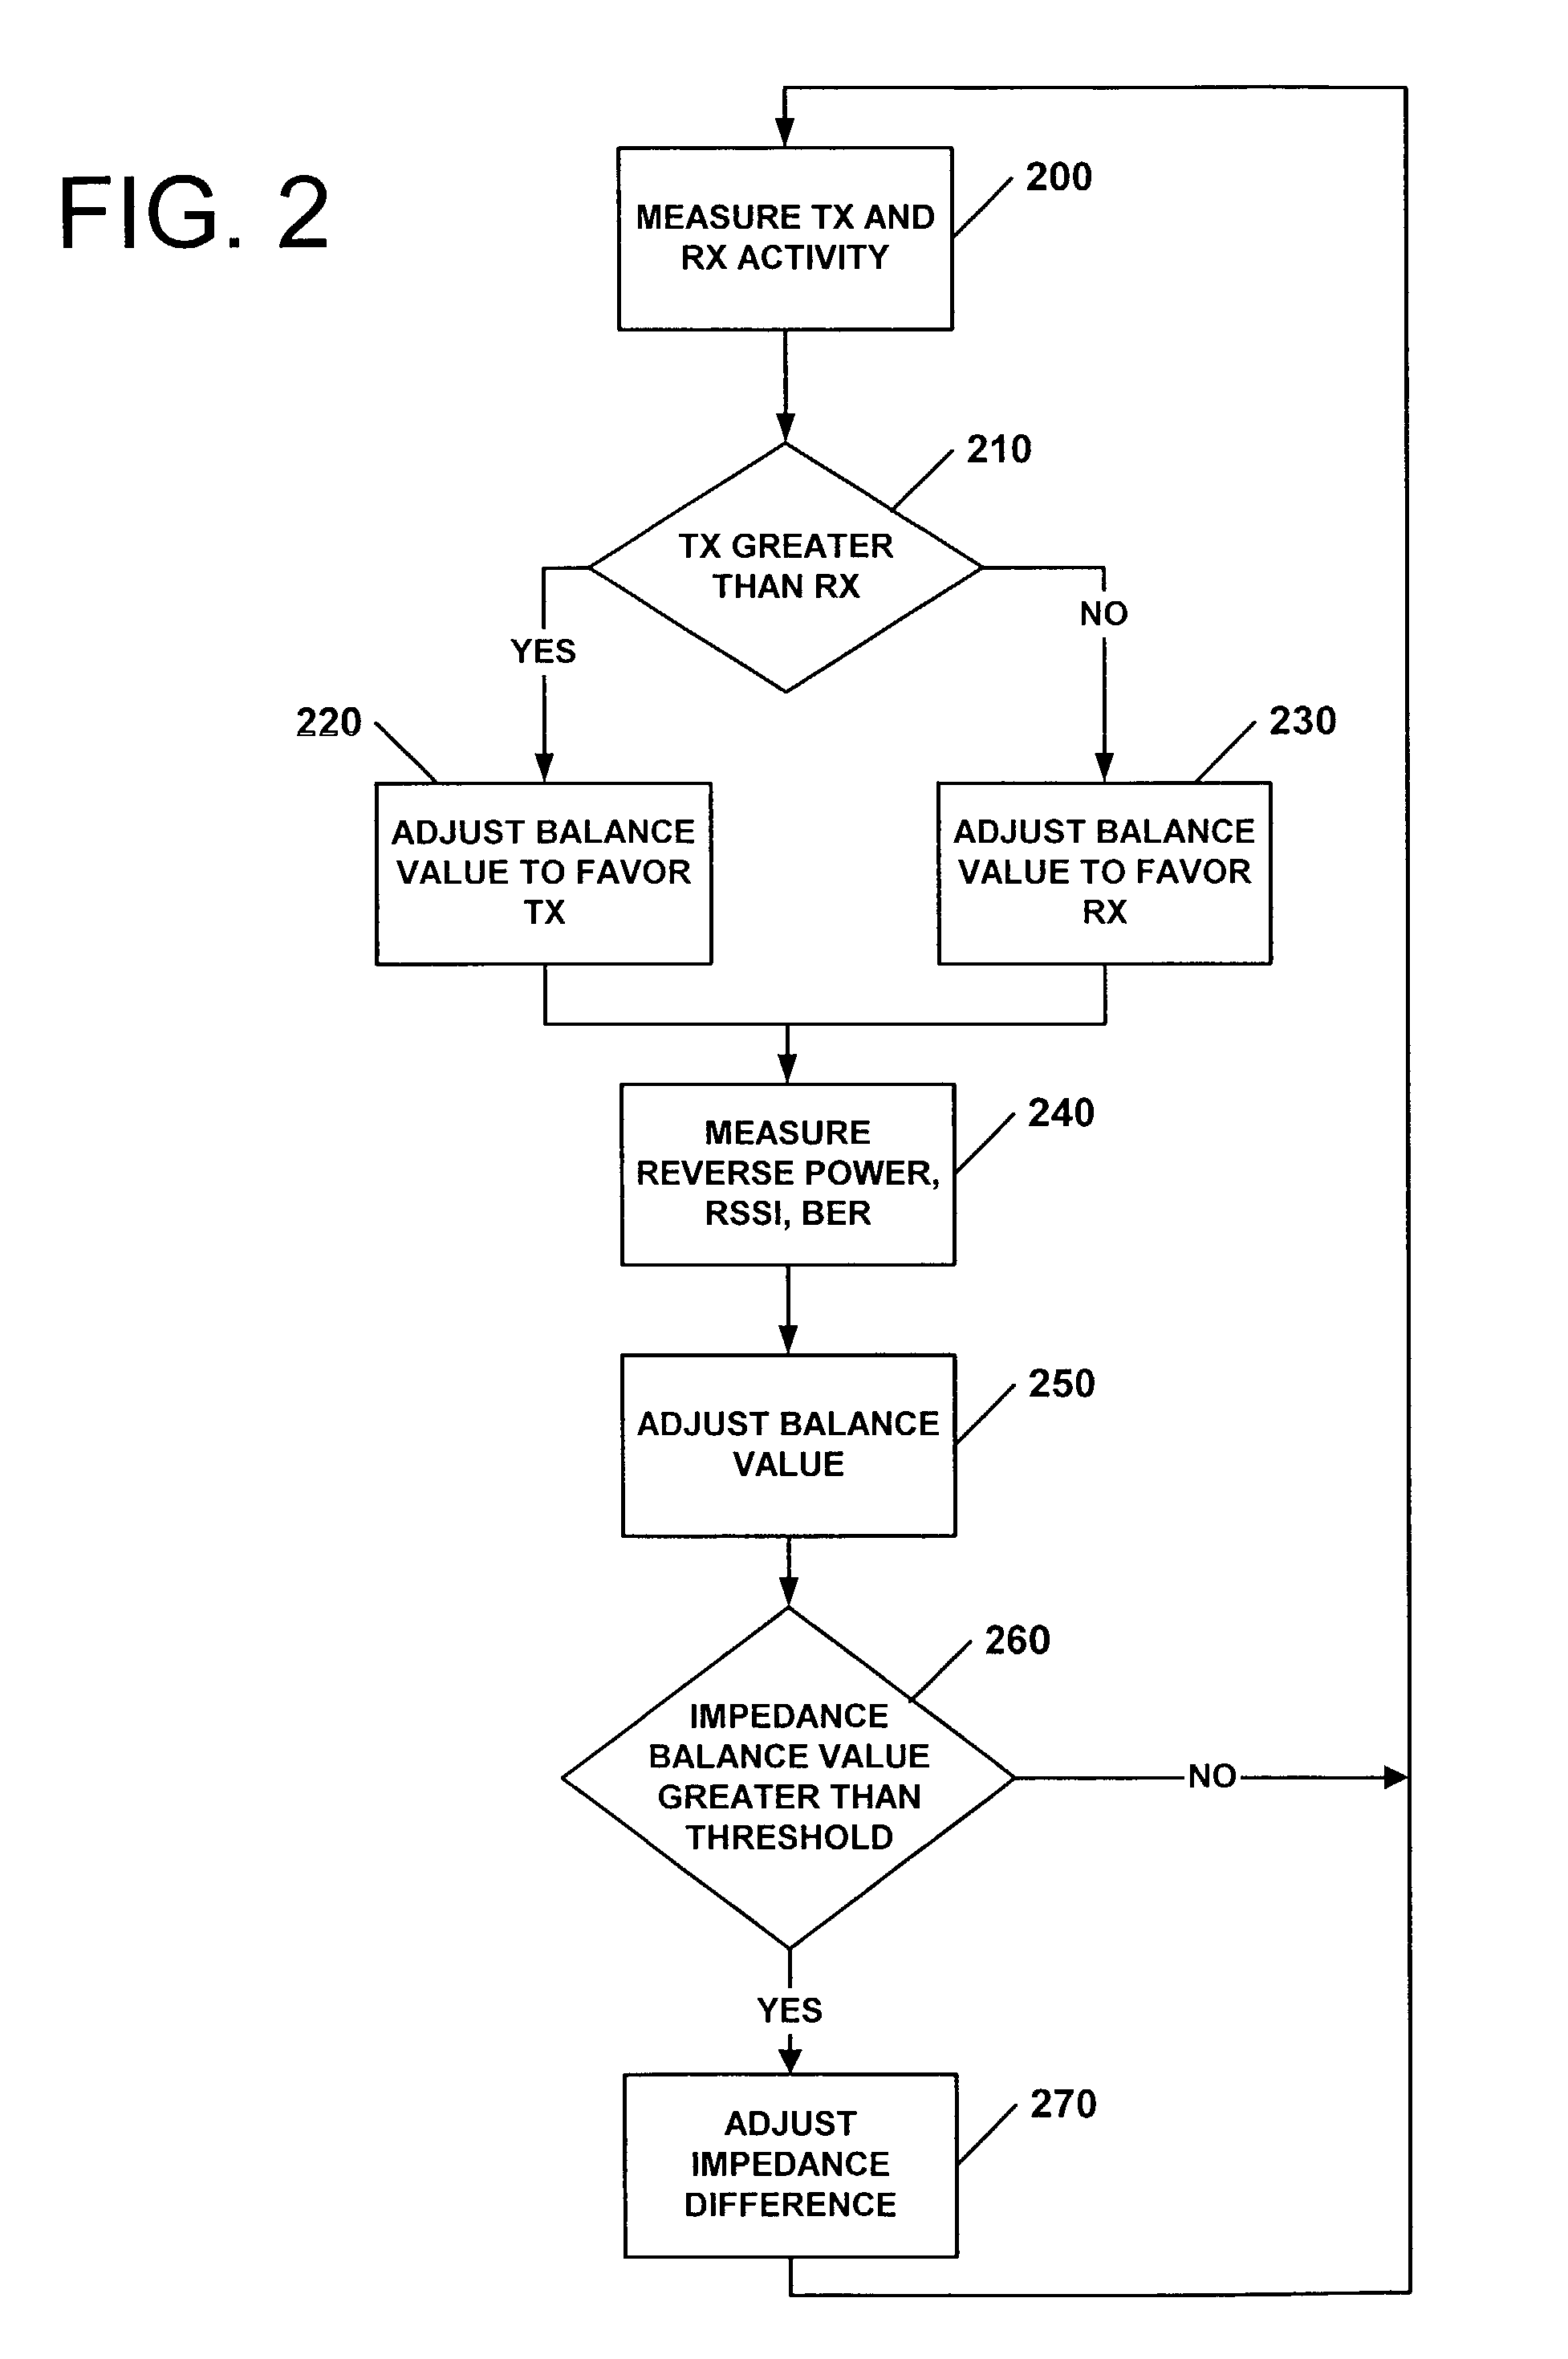 Apparatus and methods for tuning antenna impedance using transmitter and receiver parameters